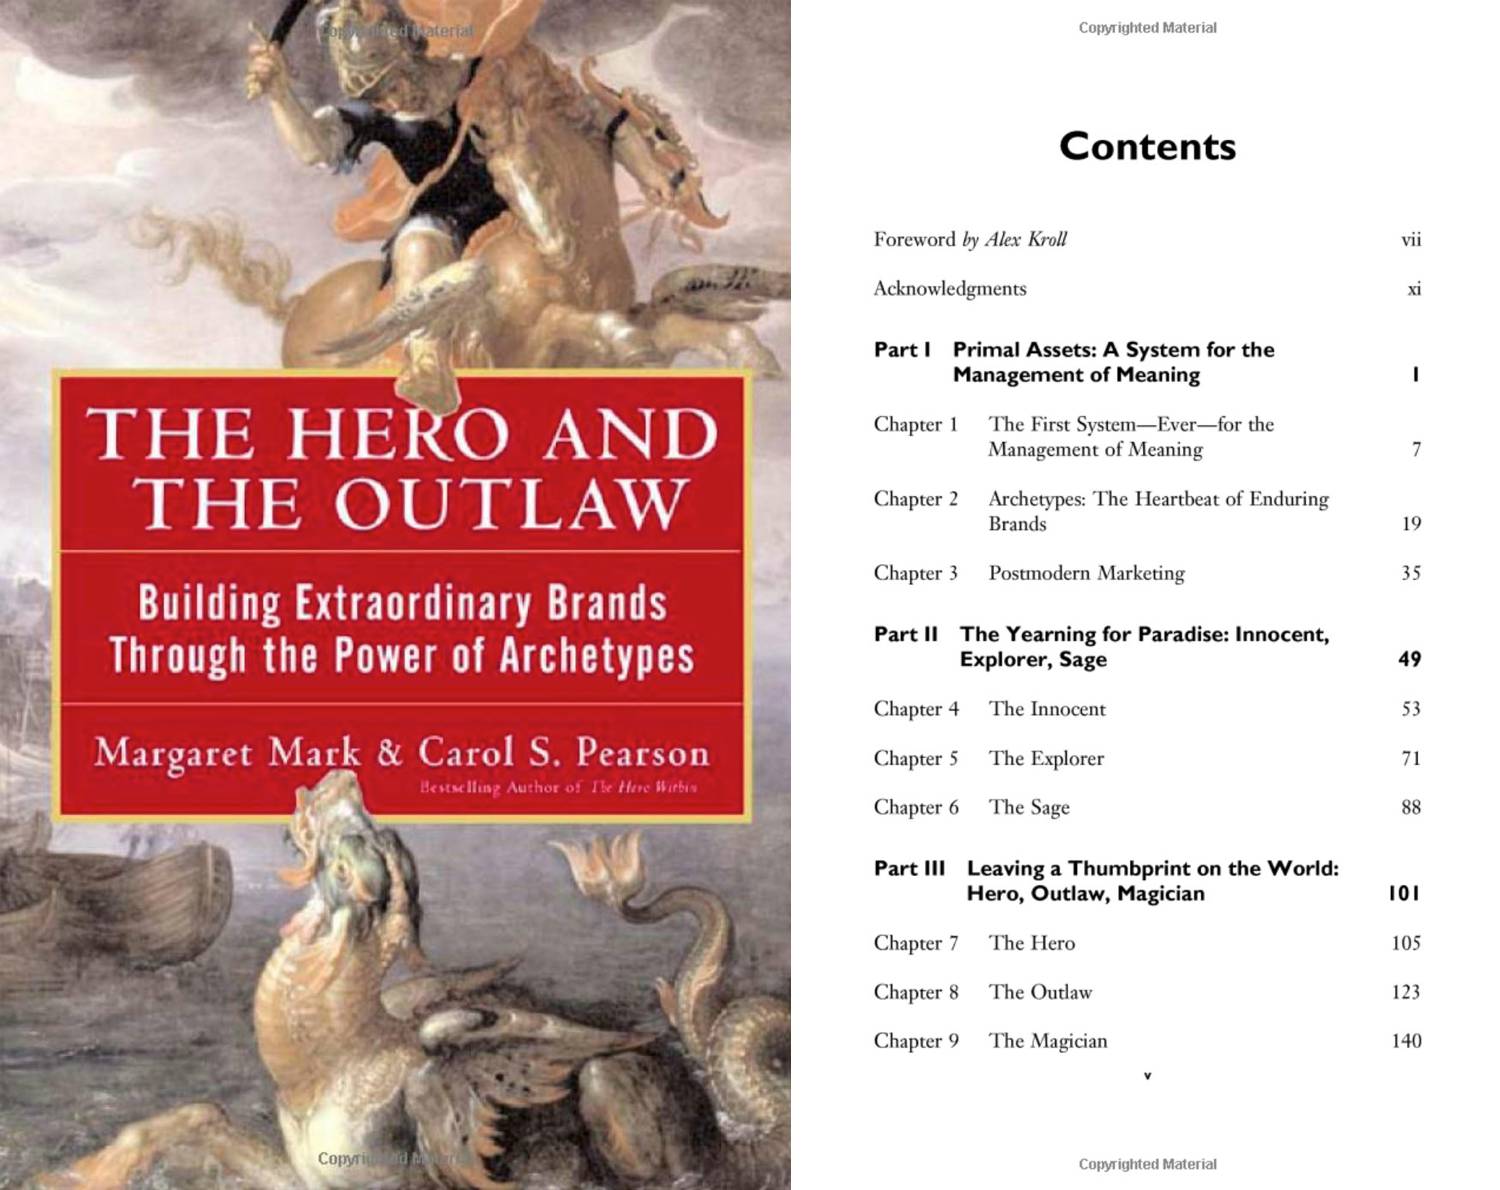 The brand archetypes were defined by Margaret Mark and Carol S. Pearson in their book, "The Hero and the Outlaw: Building Extraordinary Brands Through the Power of Archetypes."